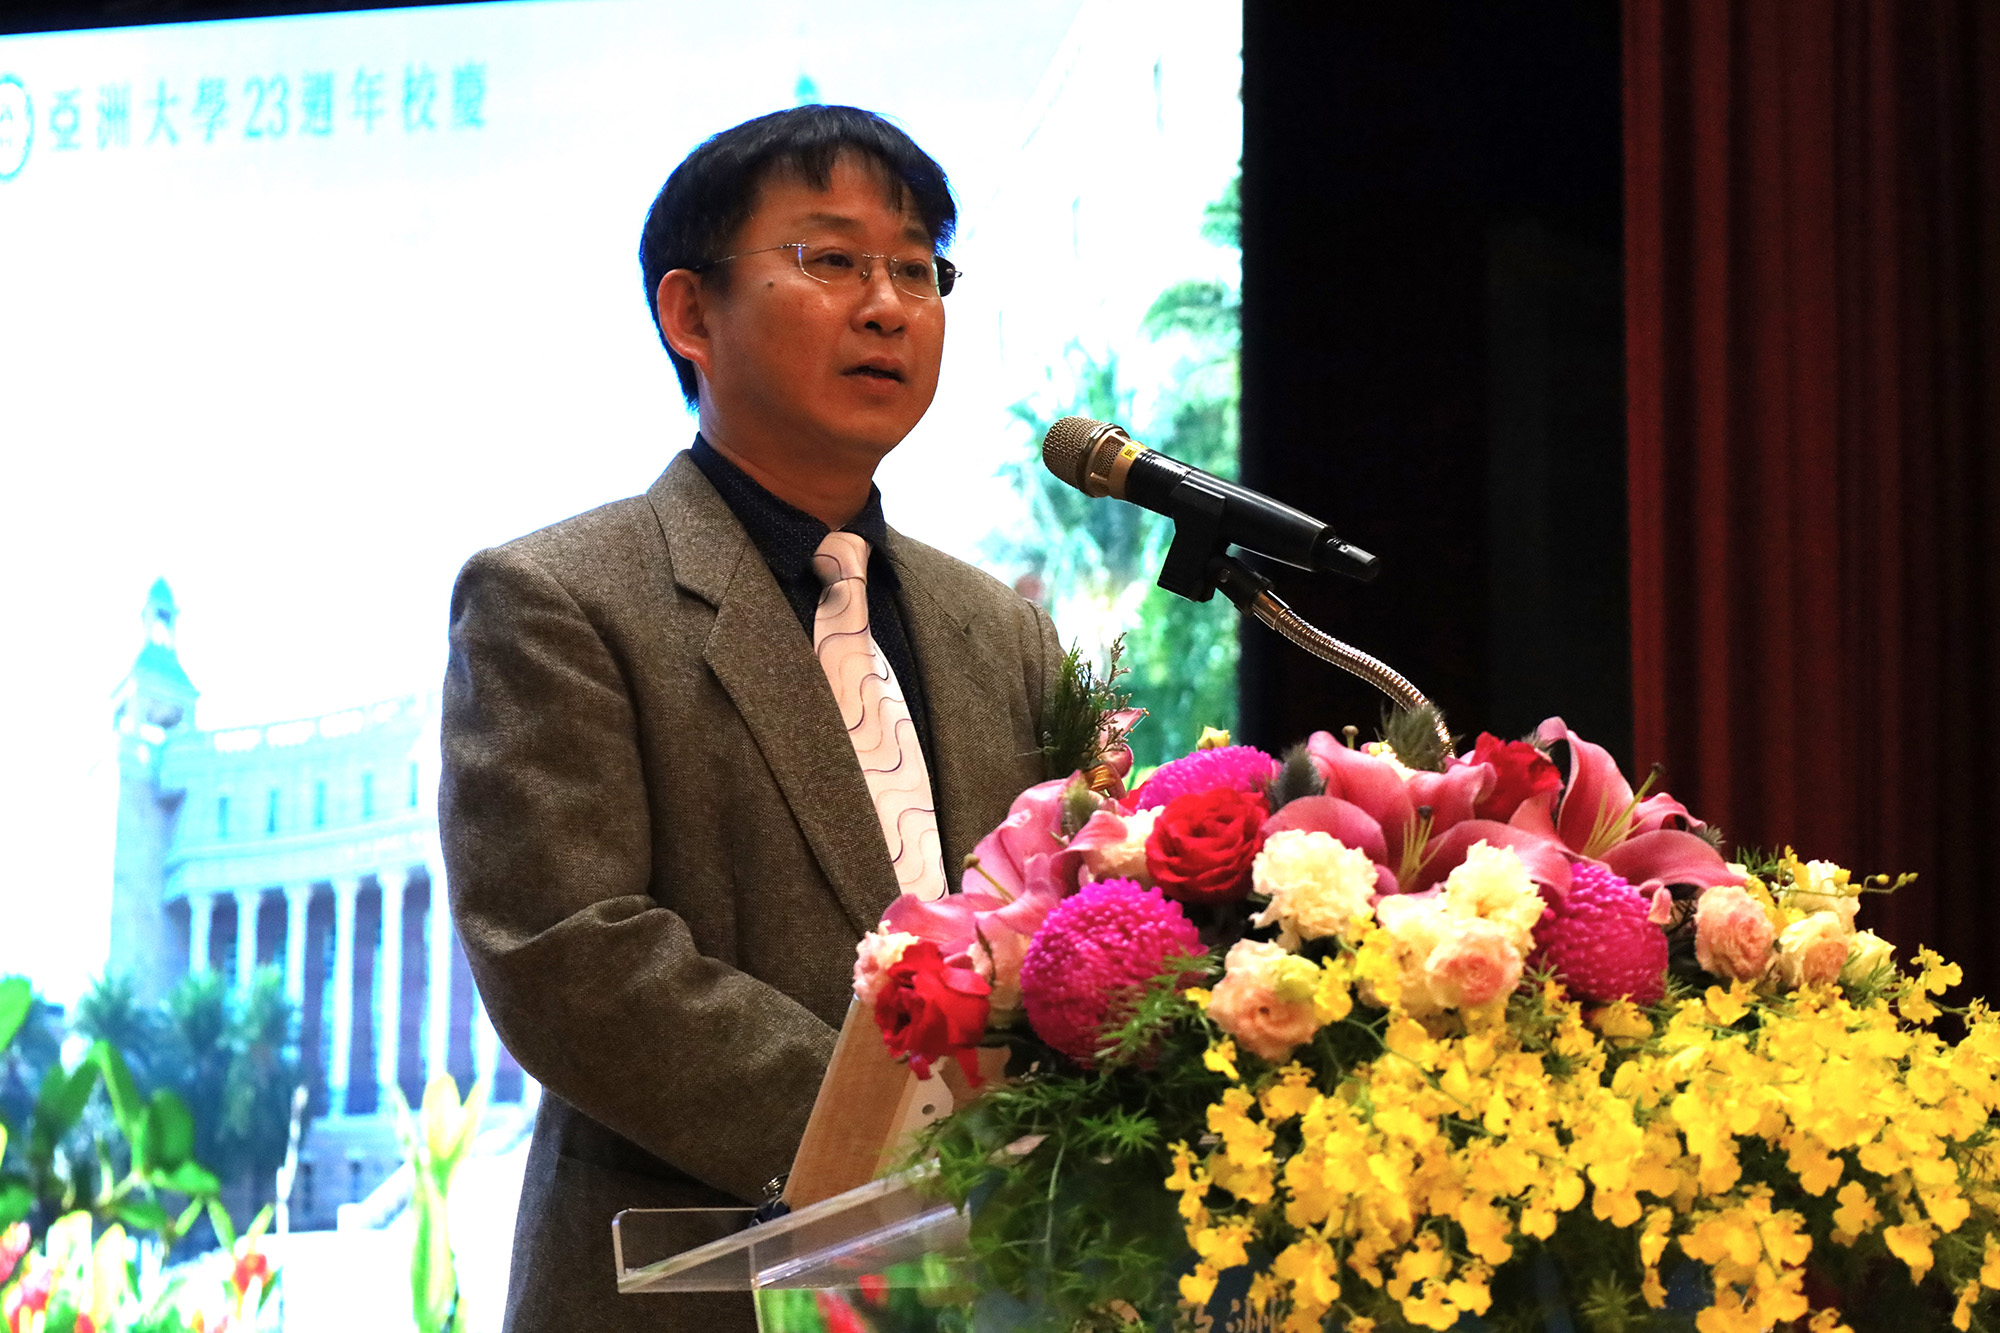 Principal Yen-Huang Wang of National Changhua Senior High School expressed that "Asia University is the top choice in my heart!"